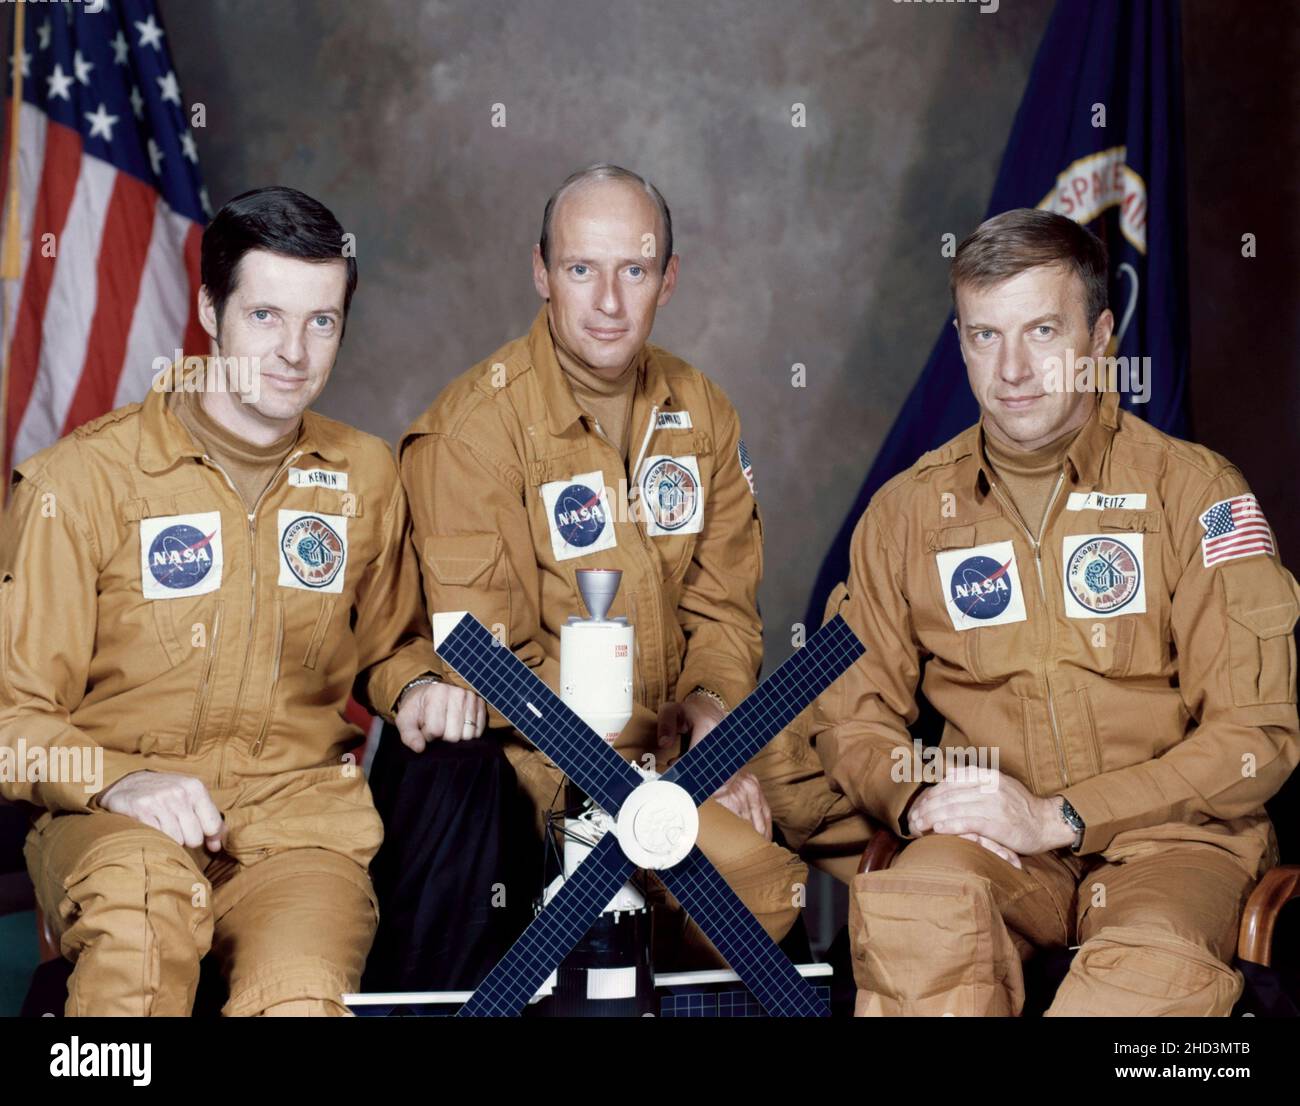 (May 1973) --- These three astronauts have been named by the National Aeronautics and Space Administration as the prime crew of the first manned Skylab mission. They are, left to right, Joseph P. Kerwin, science pilot; Charles Conrad Jr., commander; and Paul J. Weitz, pilot. Skylab is a three-part program consisting of one 28-day and two 56-day manned visits spanning an eight-month period. One day prior to the launch of this crew, the unmanned Skylab space station cluster will be launched and placed in Earth orbit. The first manned mission will last up to 28 days. Stock Photo